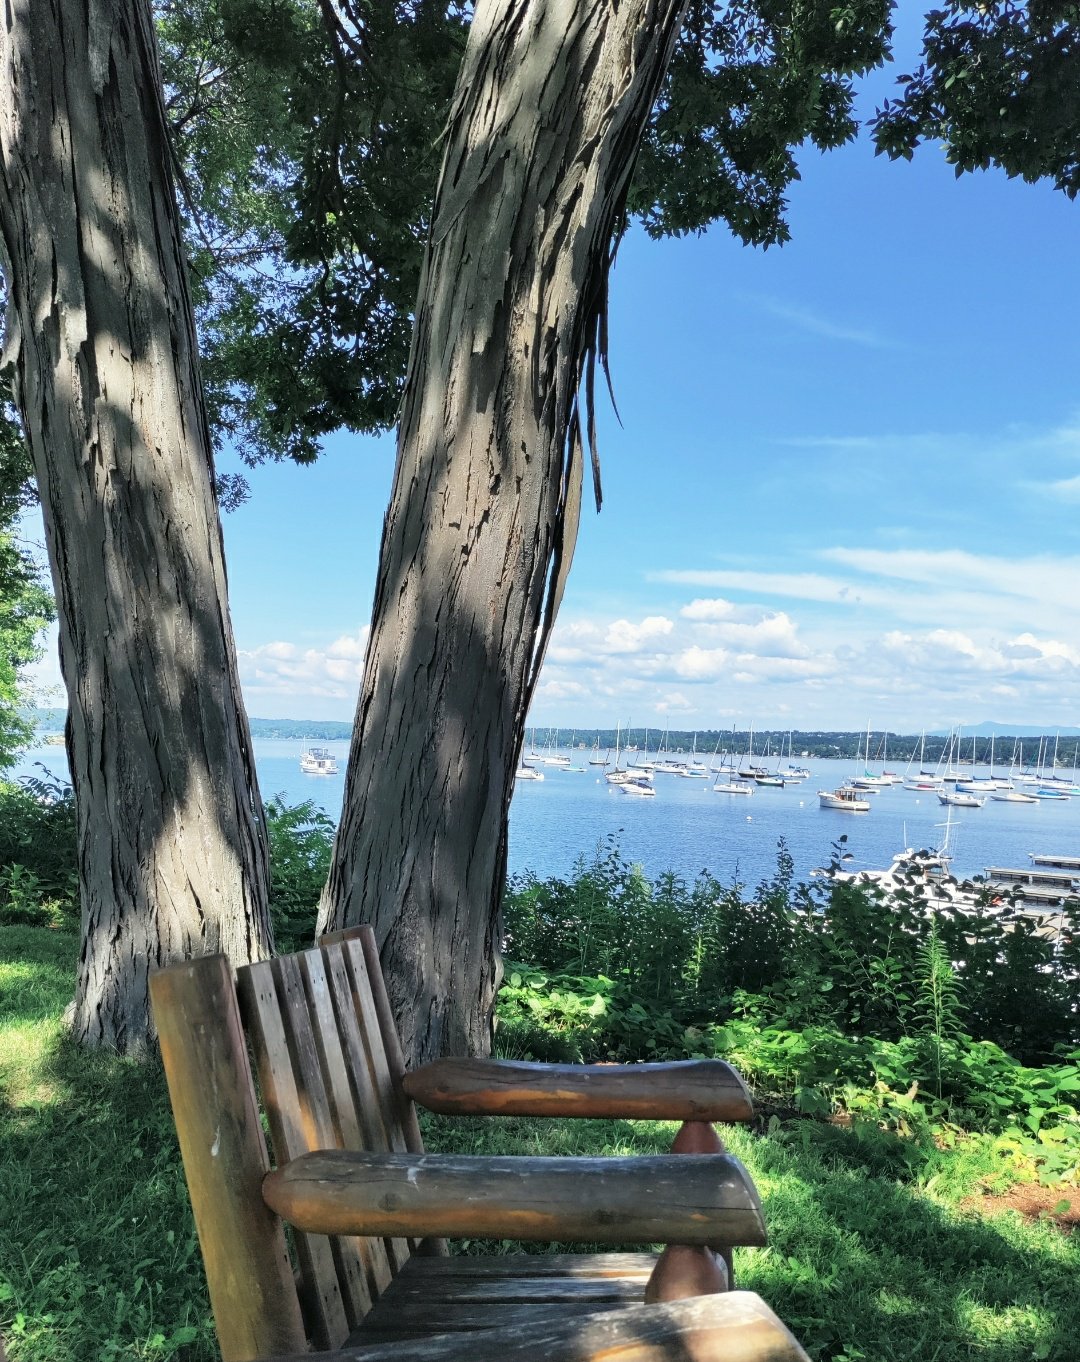 View between the trees on the lawn of the Lake Champlain Yacht Club